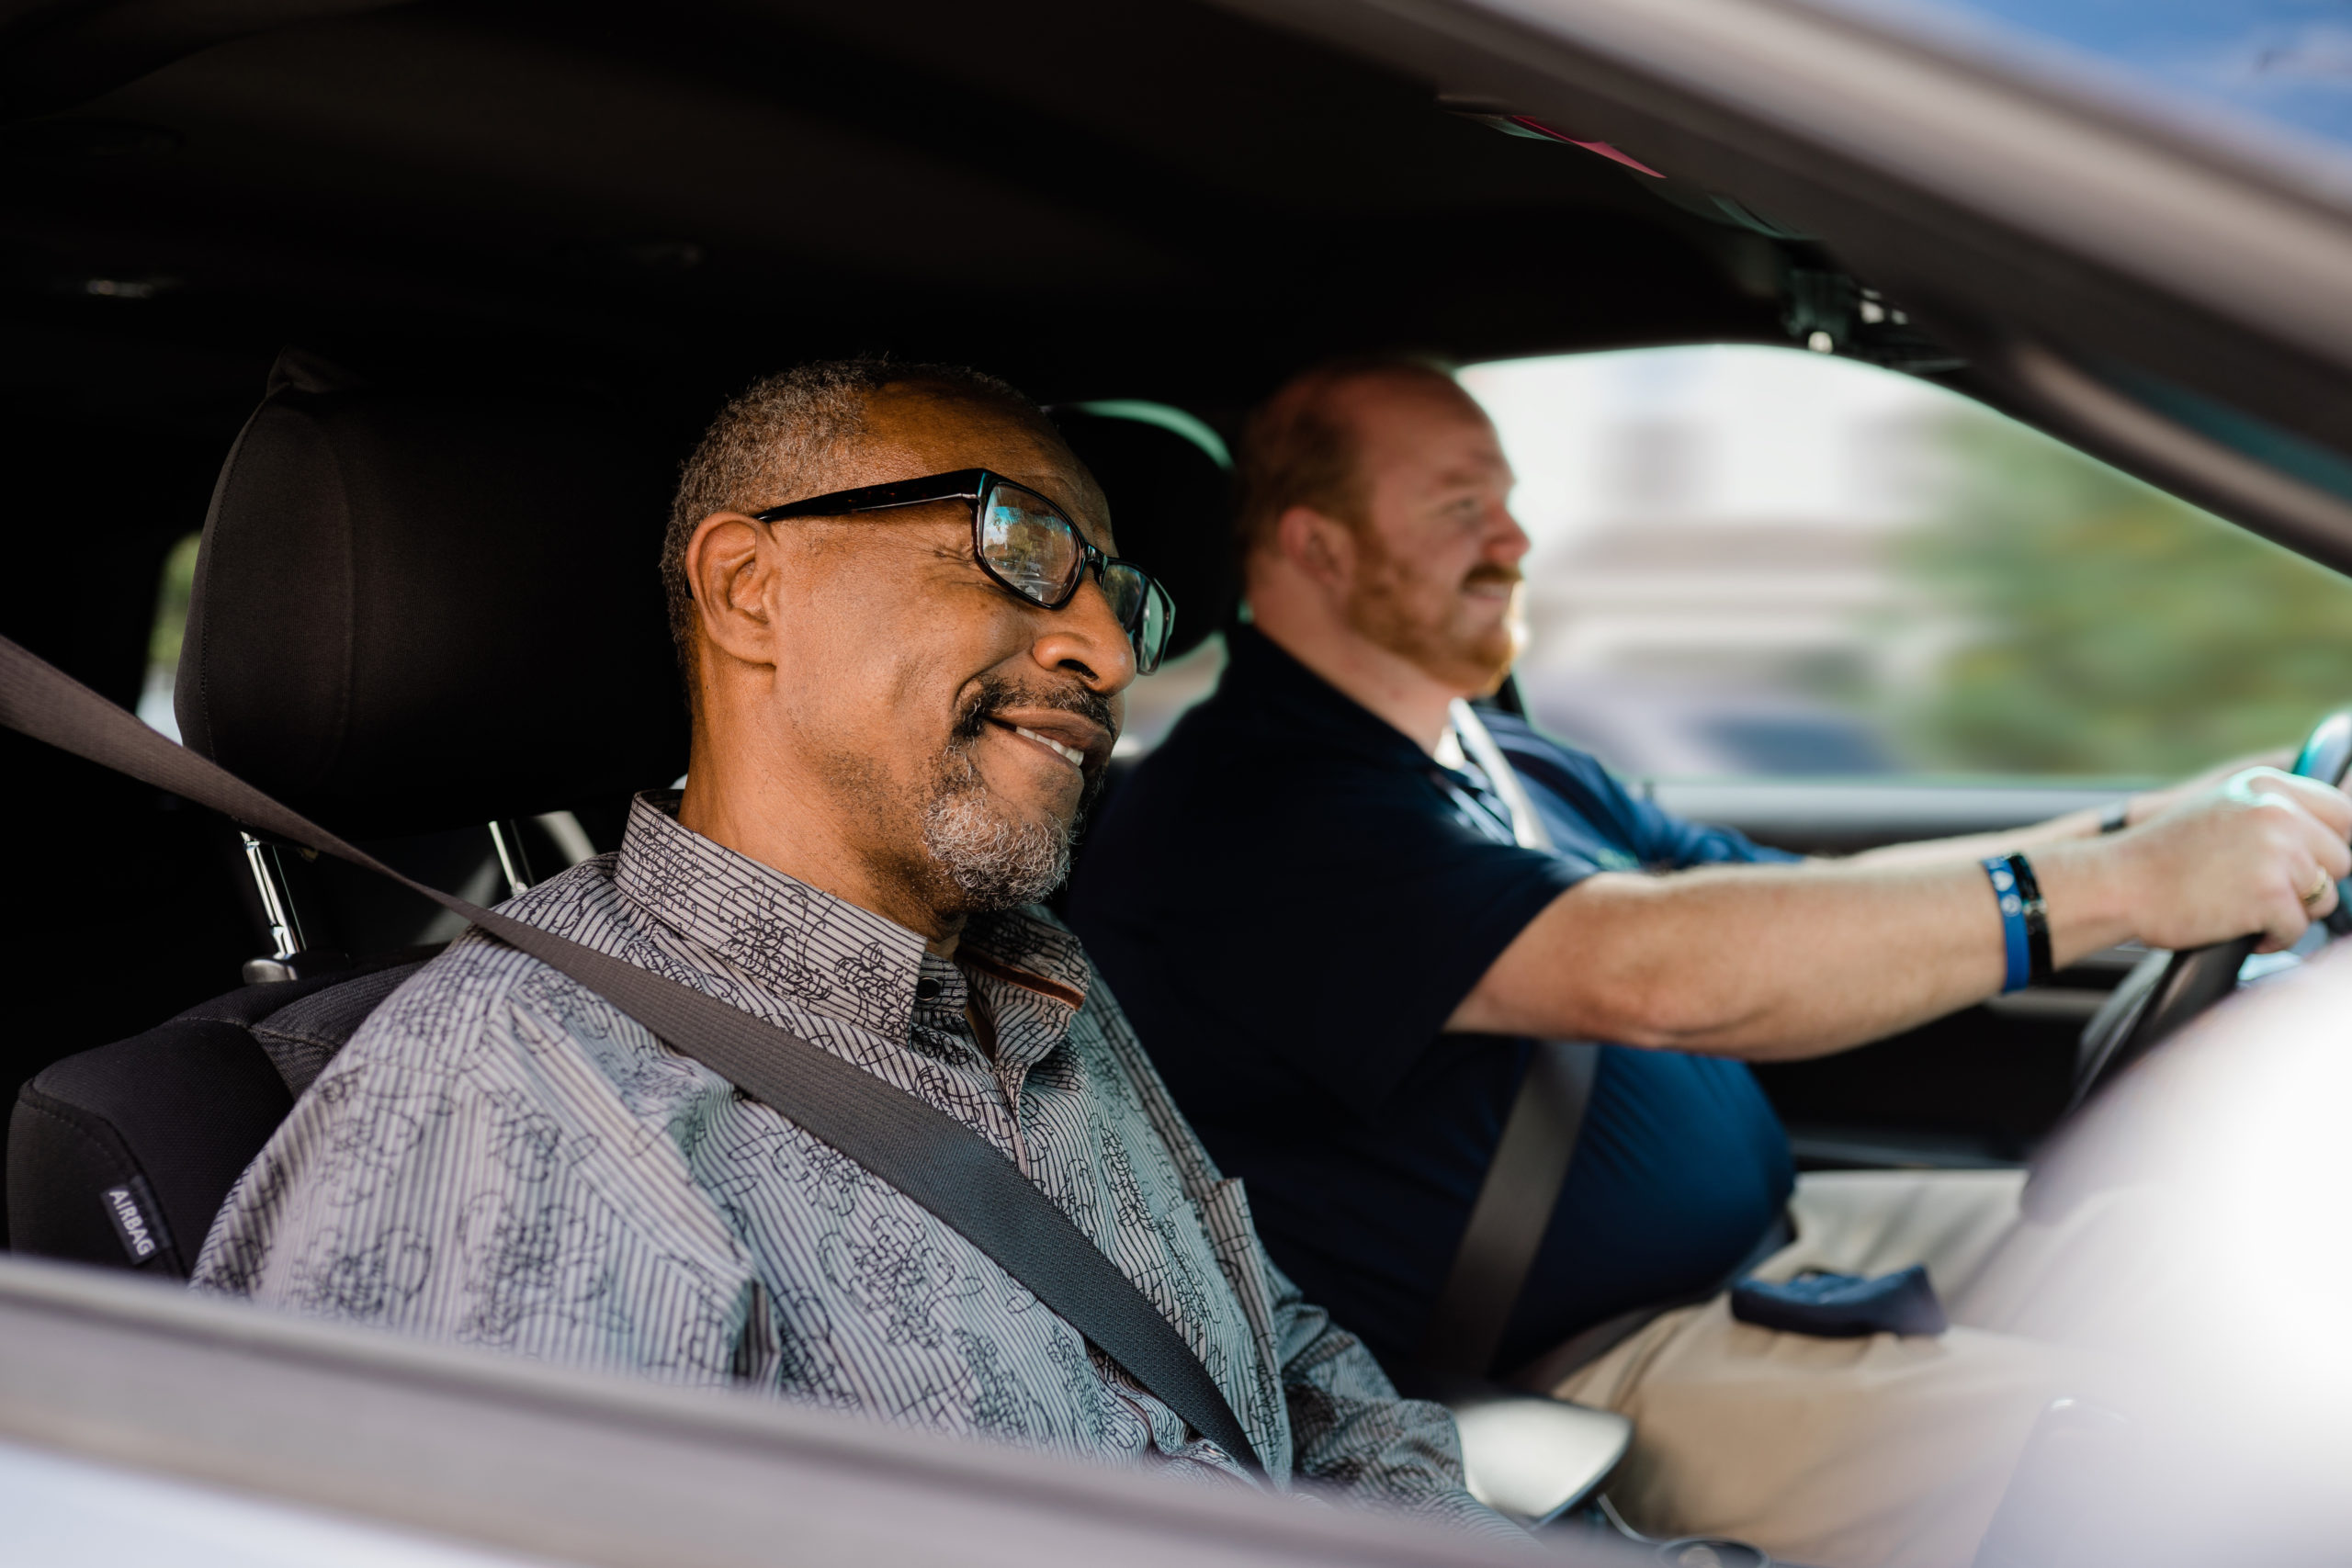 Black man with glasses is seated in the passenger seat as white man with a short beard drives.